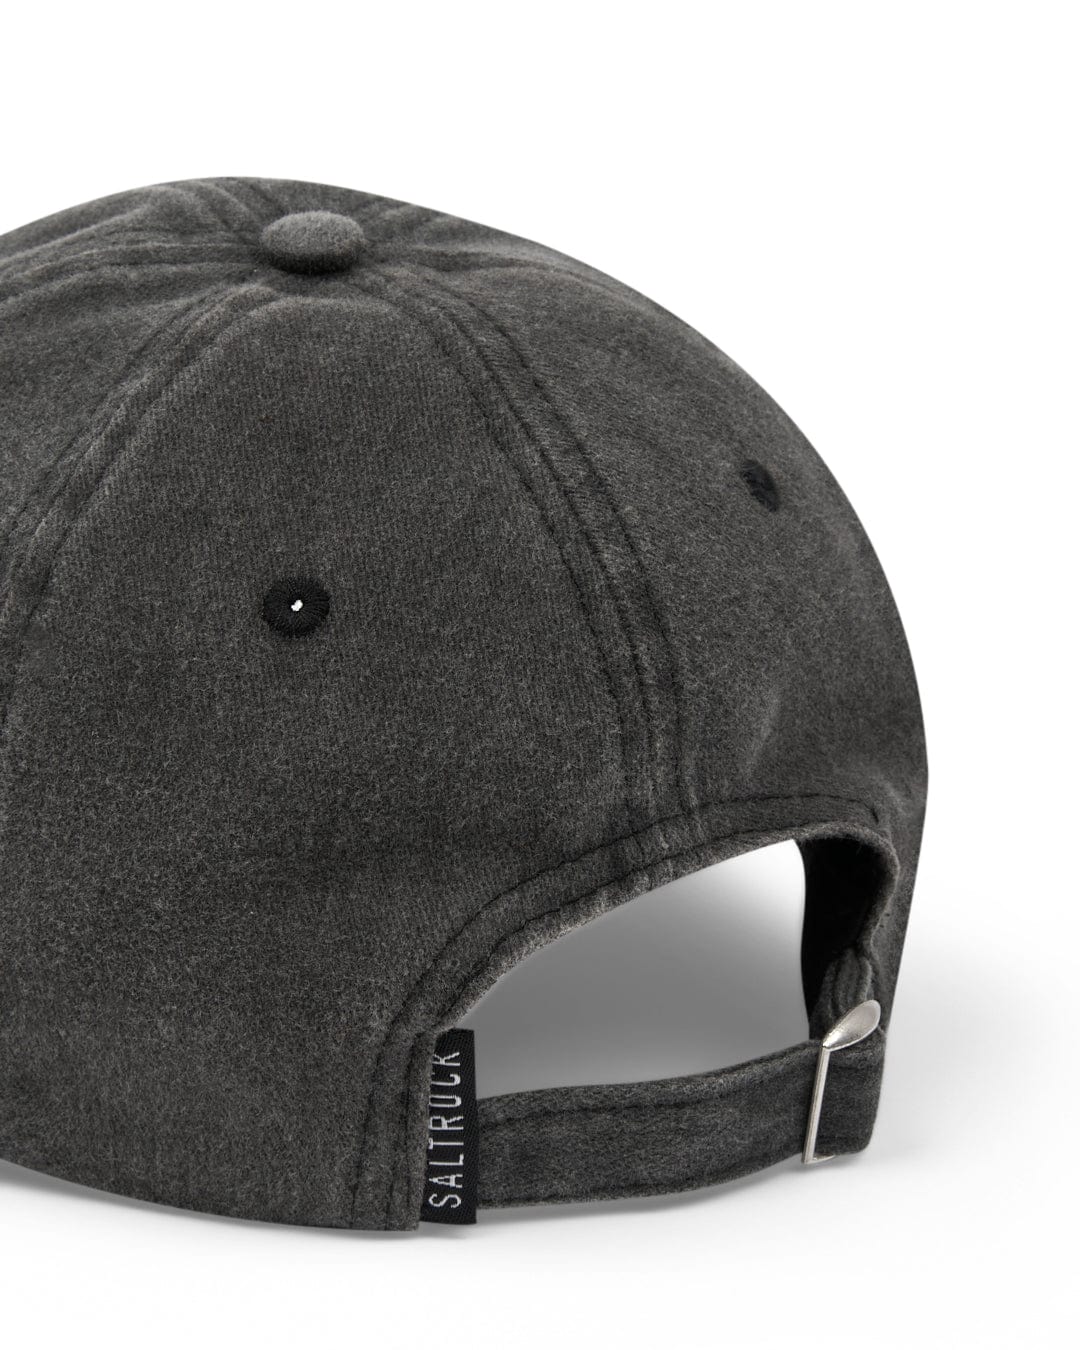 Adjustable Dark Grey Palm Cap with metal clasp closure and Saltrock branded embroidery on a white background.